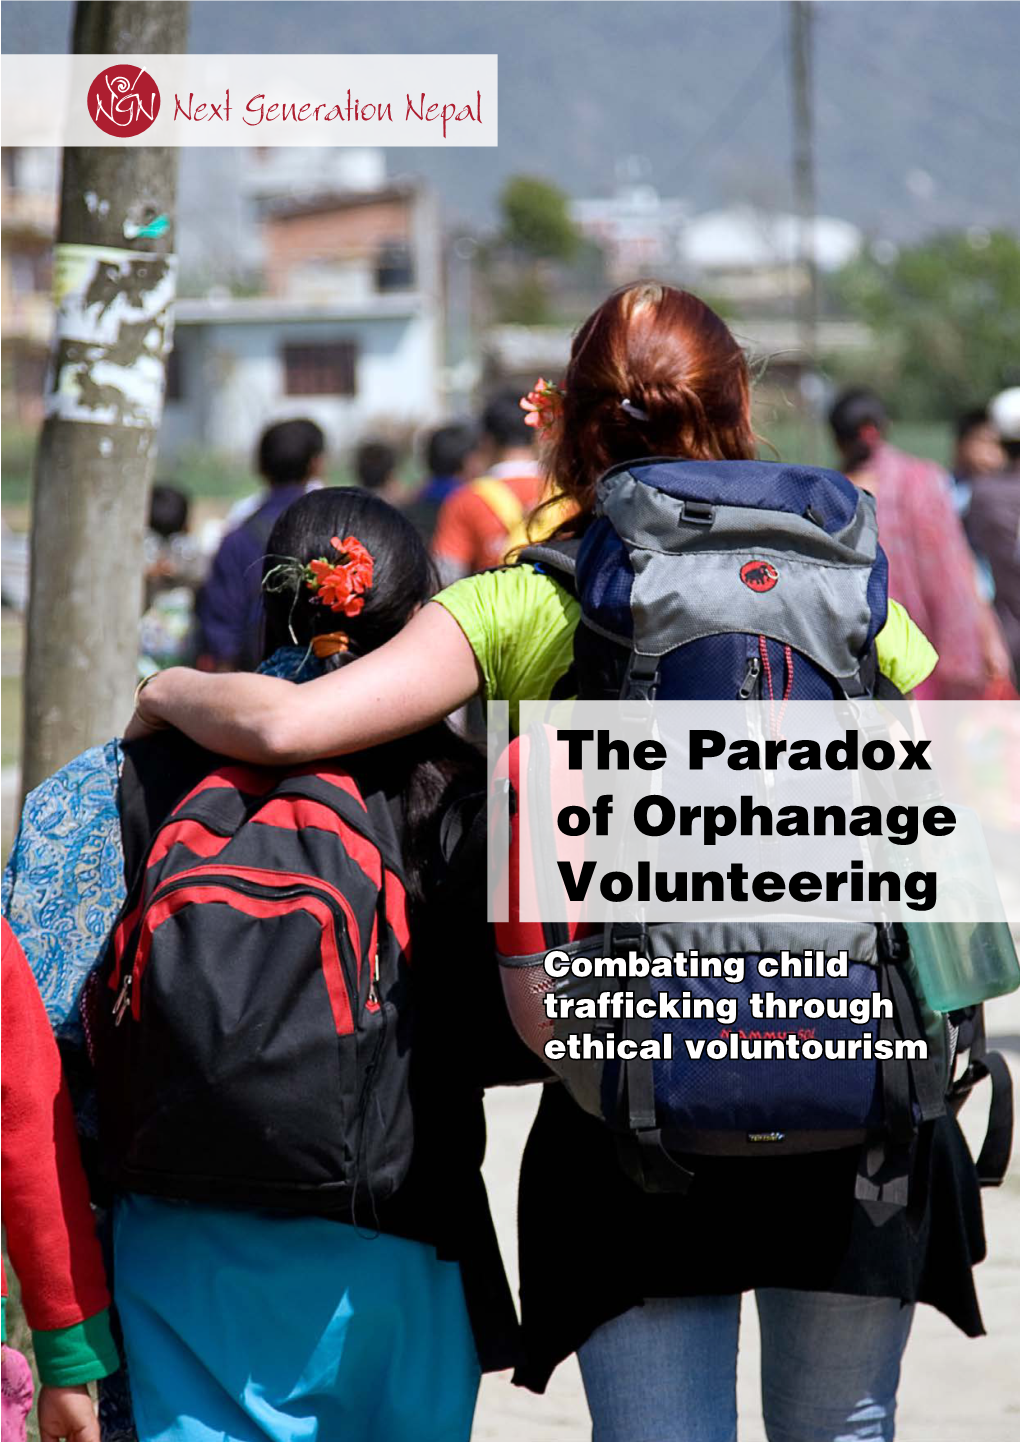 The Paradox of Orphanage Volunteering